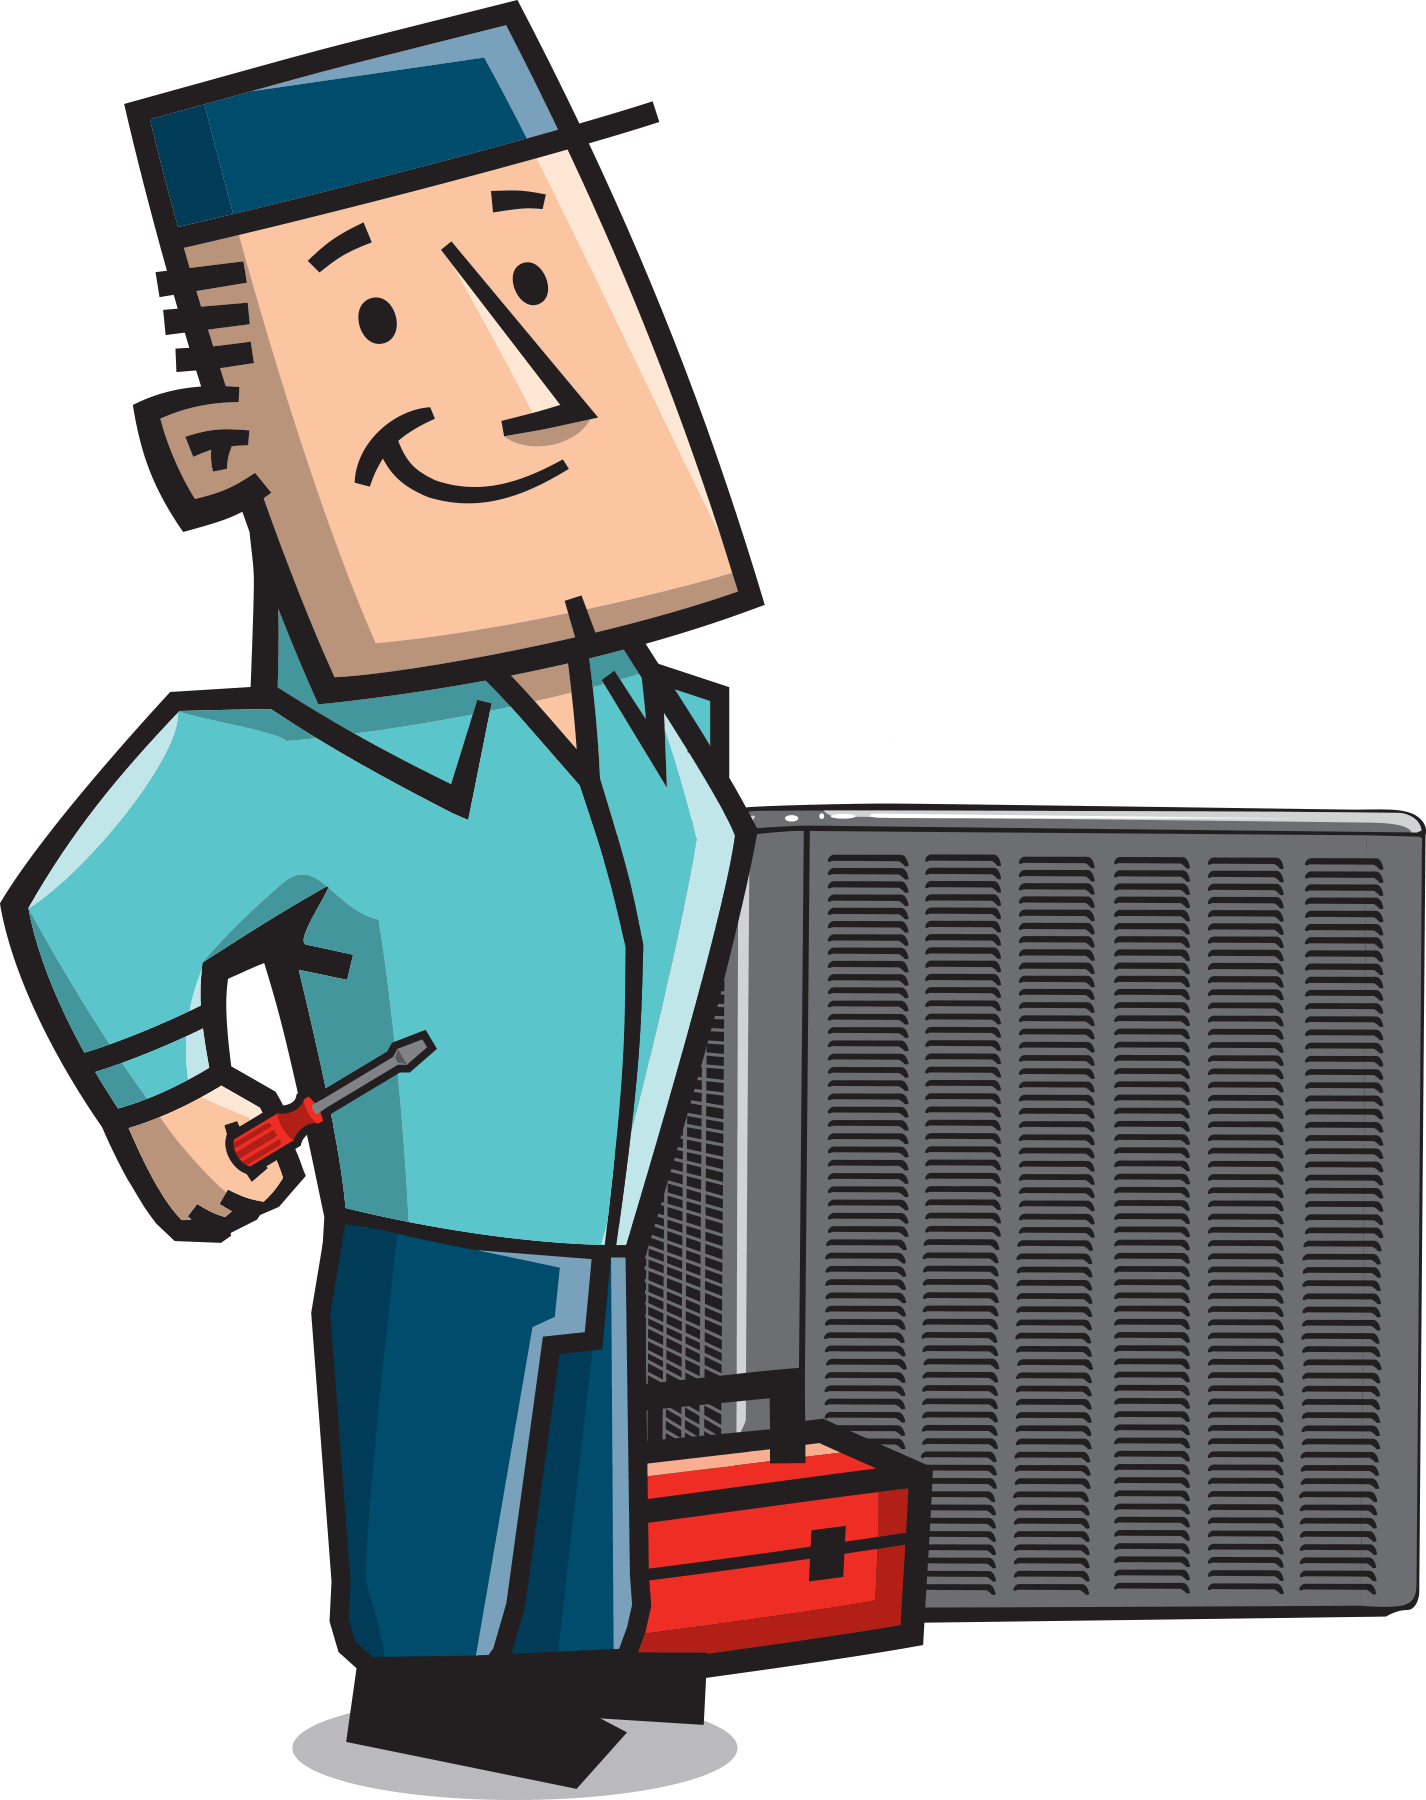 Call us for AC repair Naperville IL.